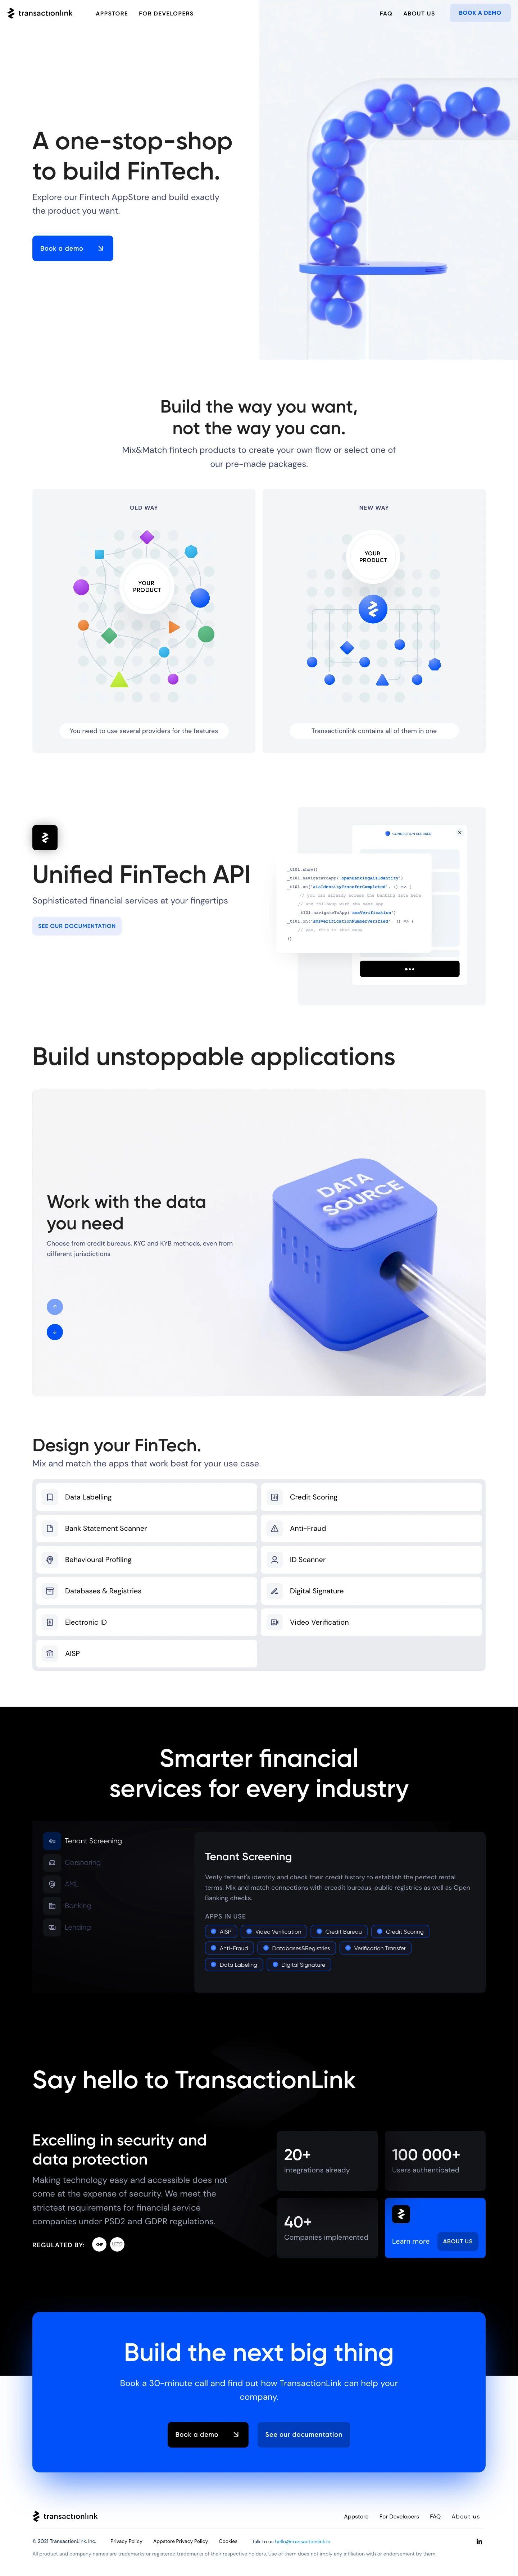 TransactionLink Landing Page Example: Connect to our API to get real-time customer banking data and build your new fintech application.